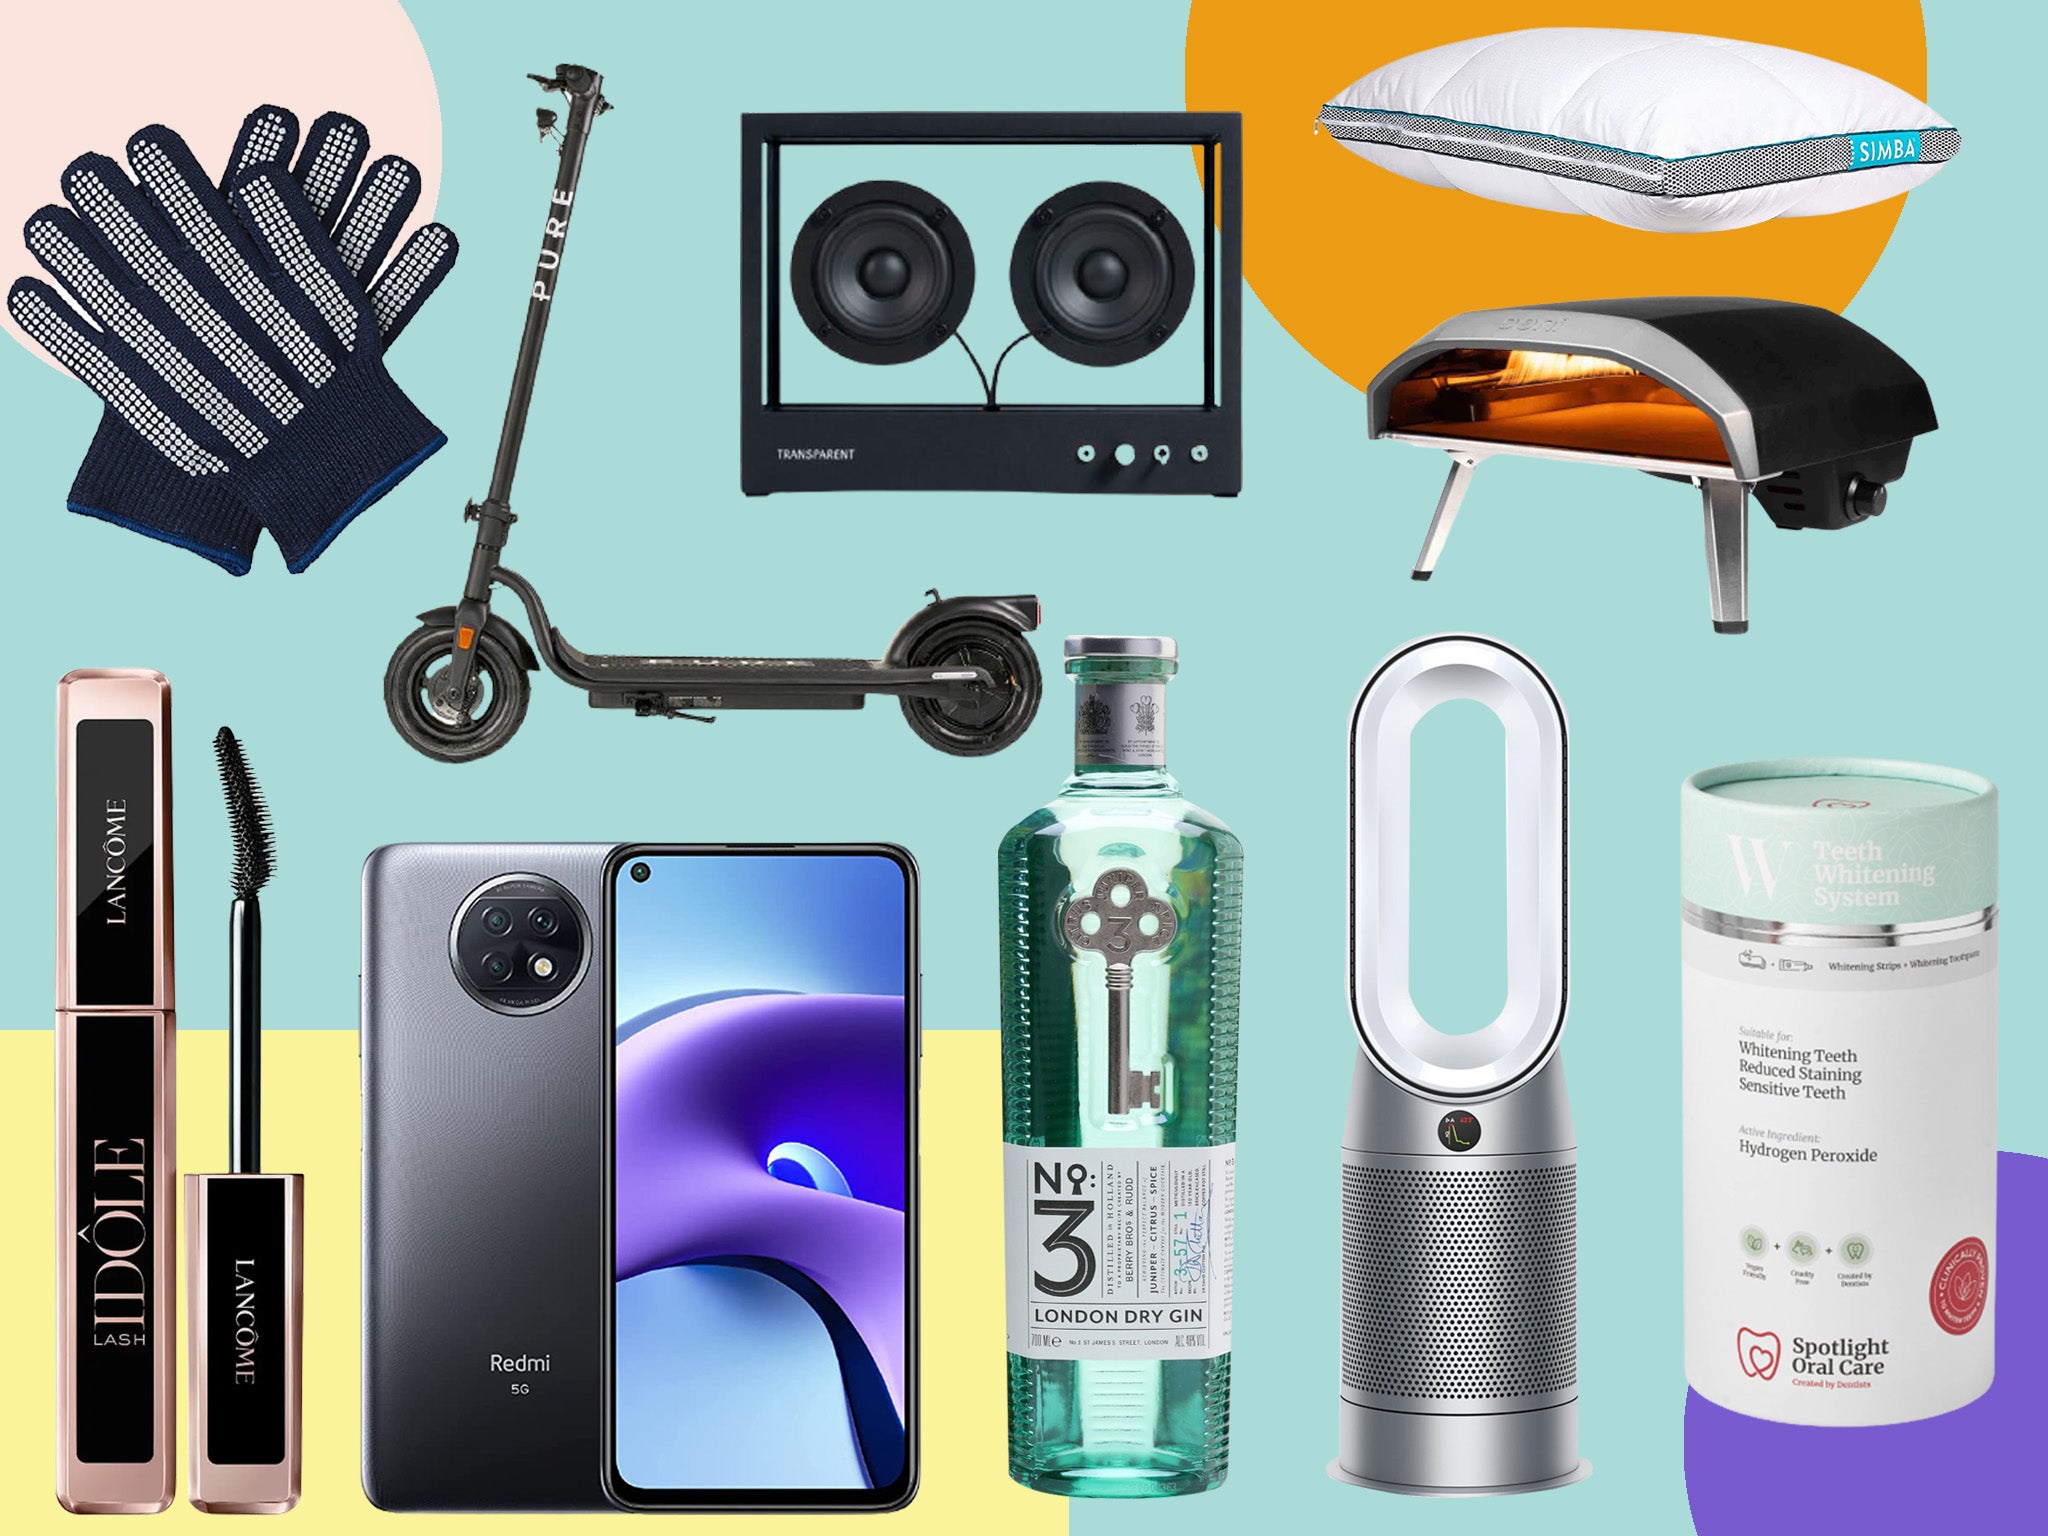 Of the thousands of products we’ve tested in the past year, these are the ones we think you should know about